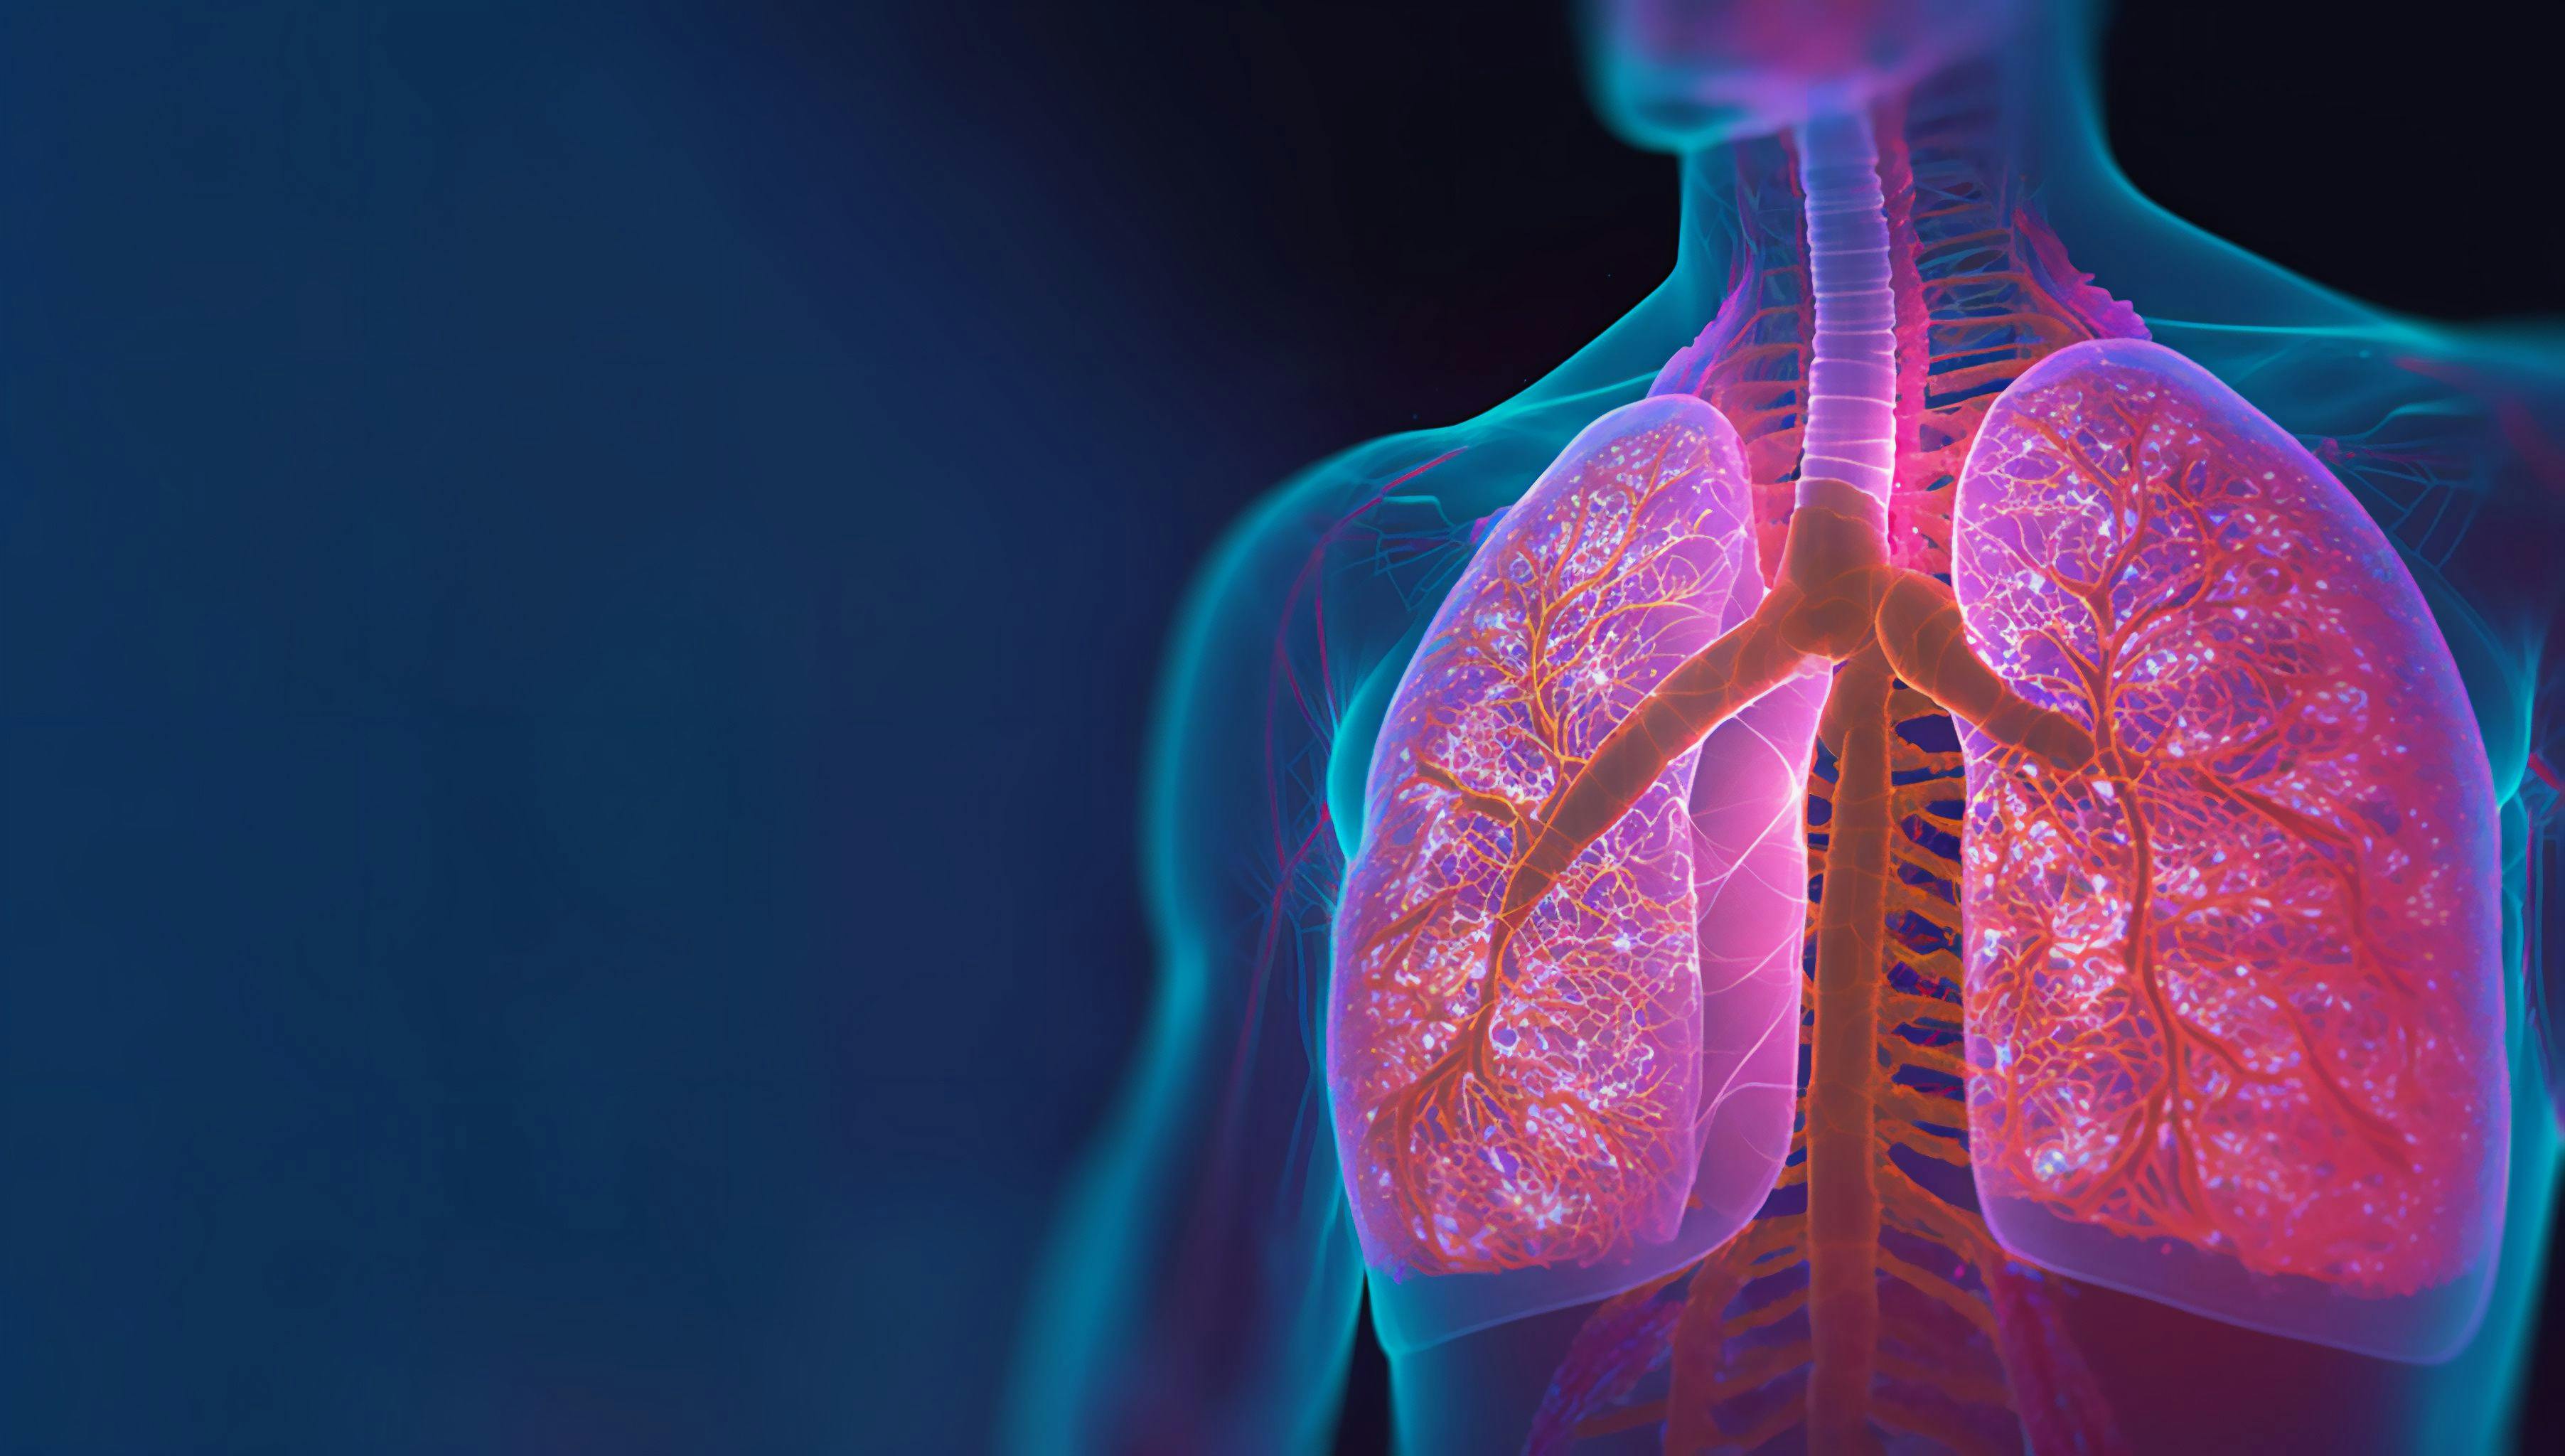 Holographic concept of lung cancer display, lung disease, treatment of lung cancer, lung illness such as pneumonia, viral infections or cancer 3d rendering | Image Credit: © catalin - stock.adobe.com